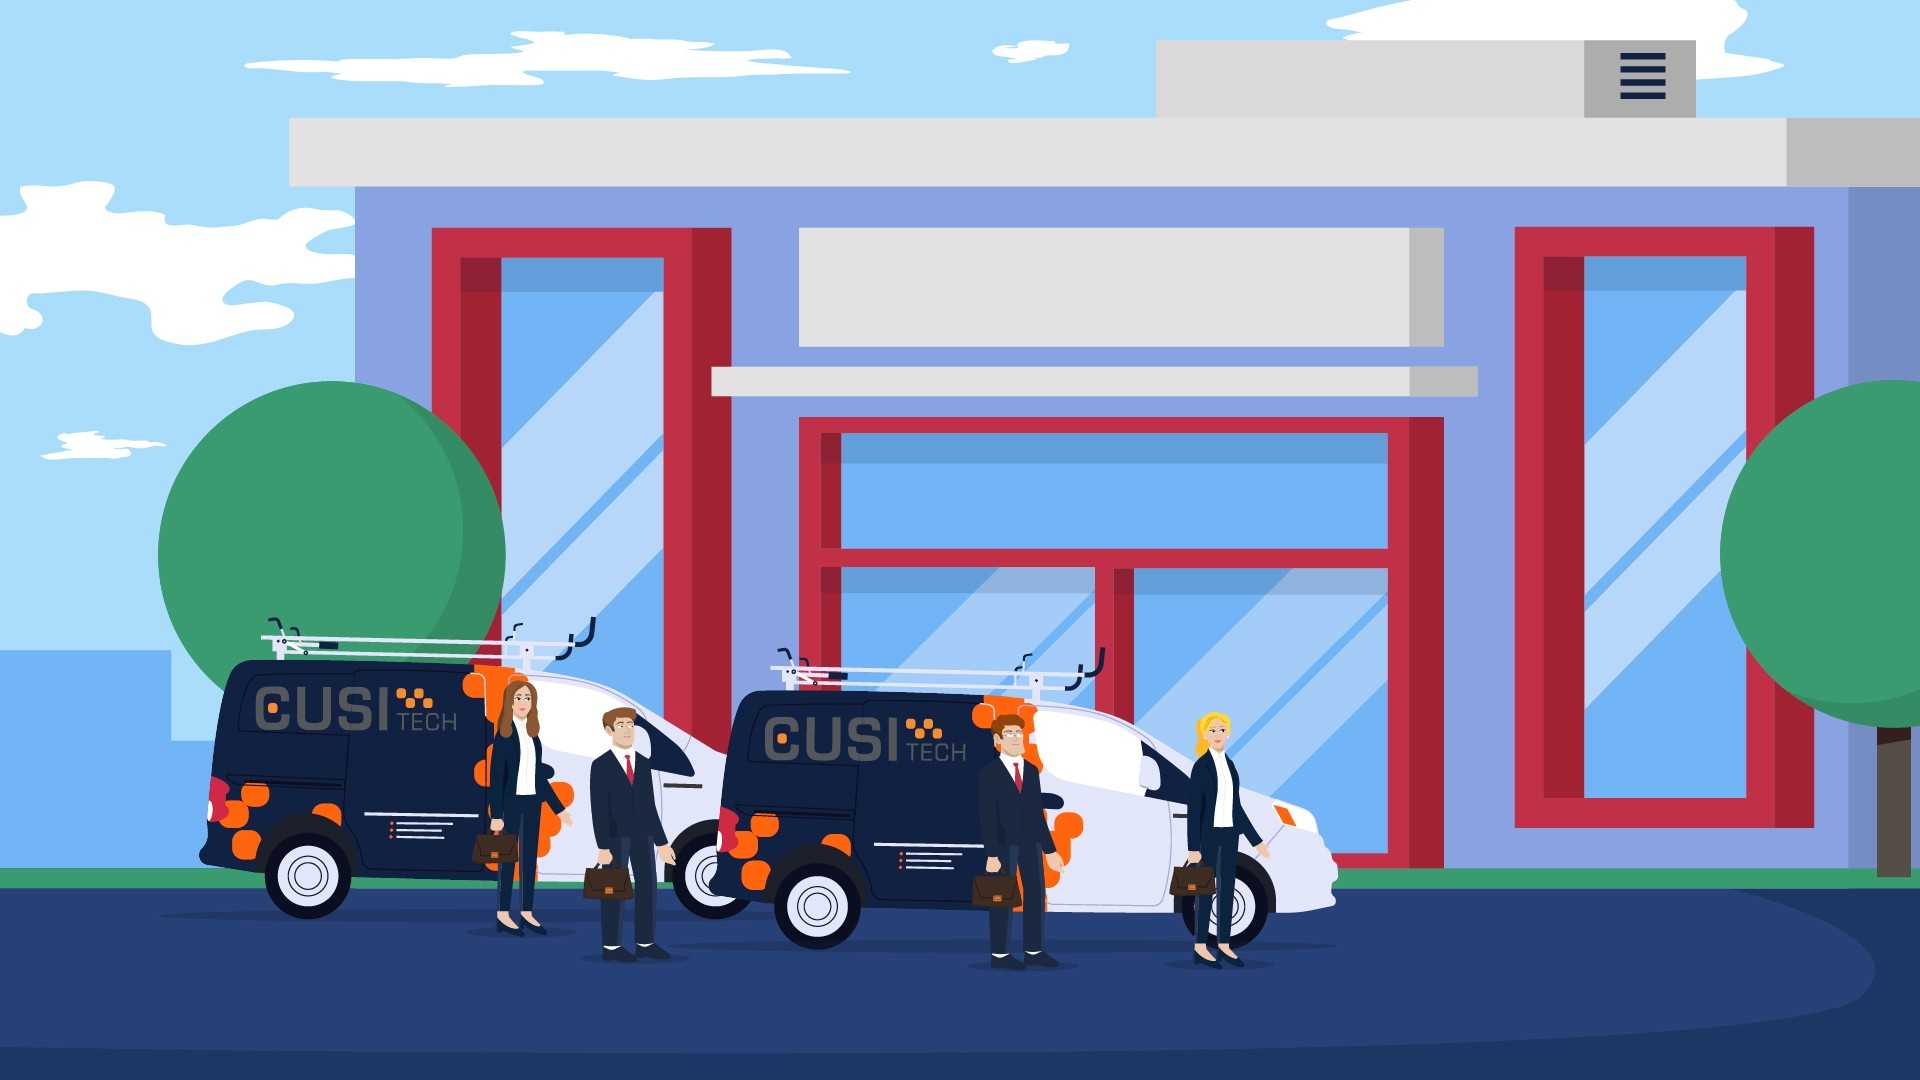 CUISITech employees in Animated Explainer Video